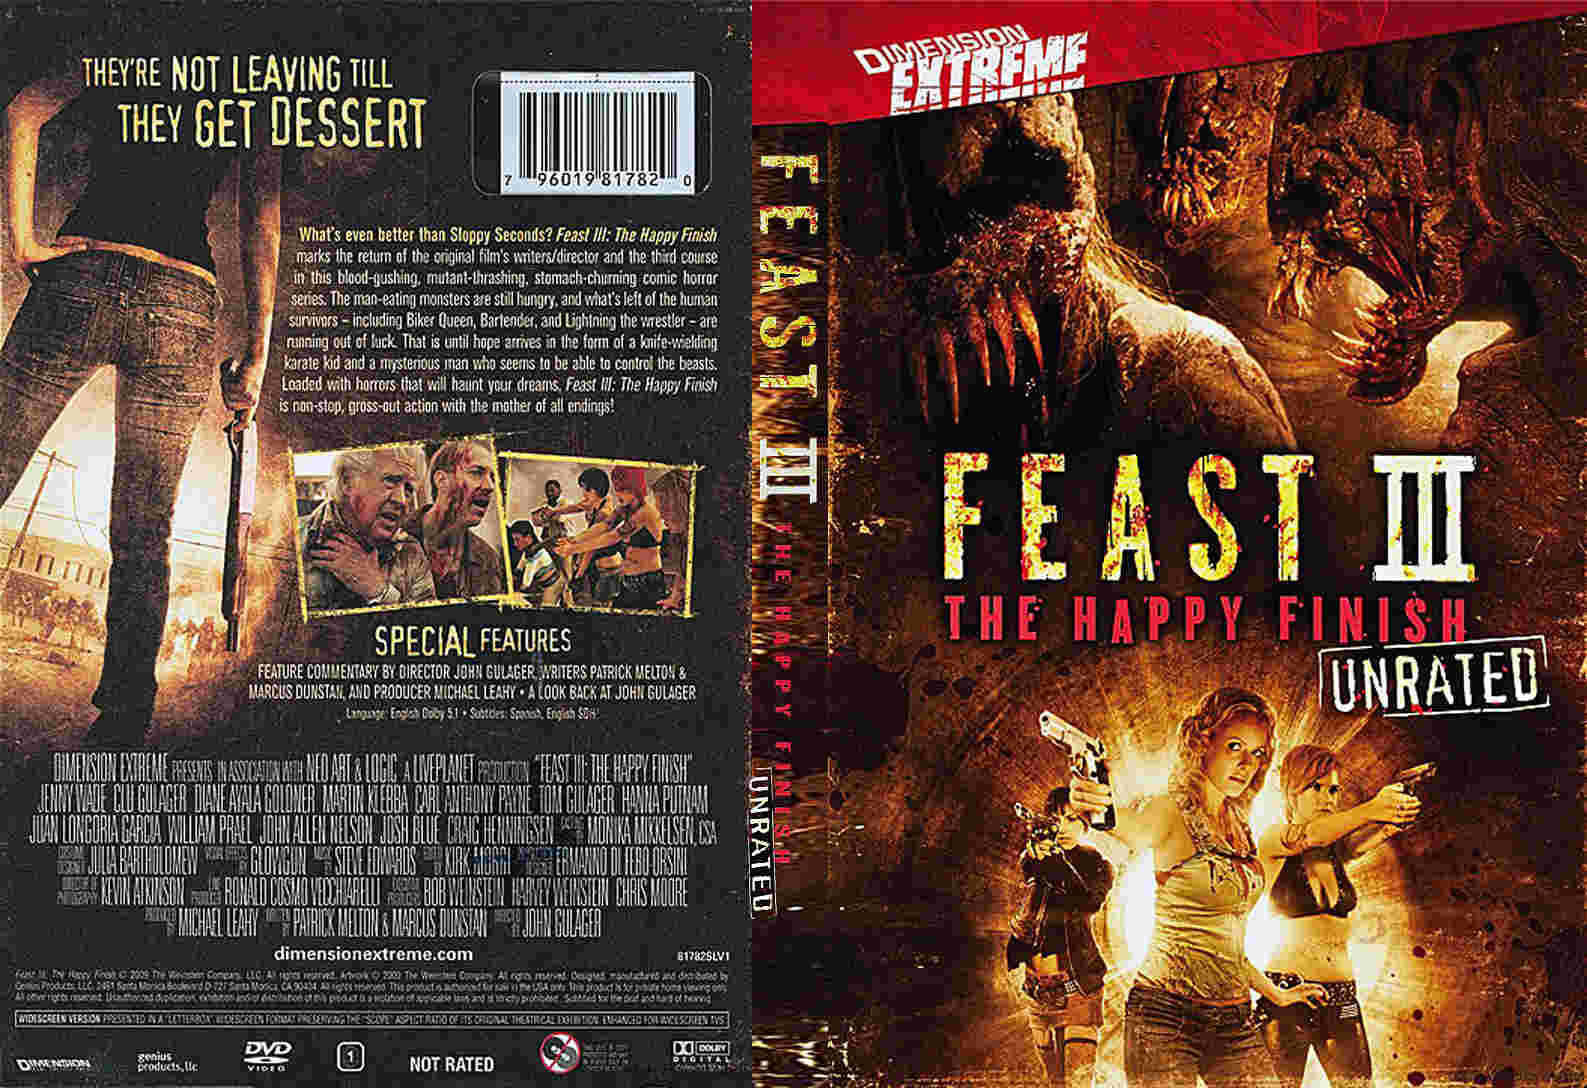 Feast 3 the happy finish watch online